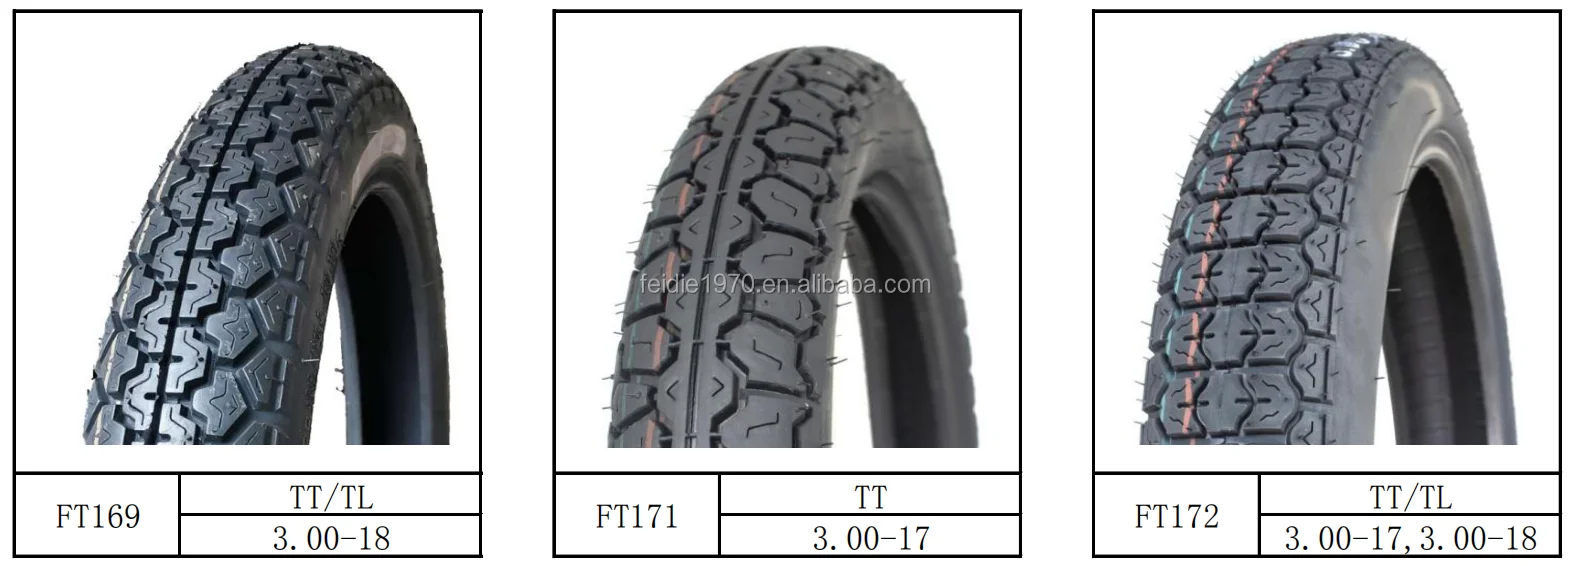 NEW 300-18 TUBE TYPE MOTORCYCLE TYRE REAR FITMENT E-MARKED 